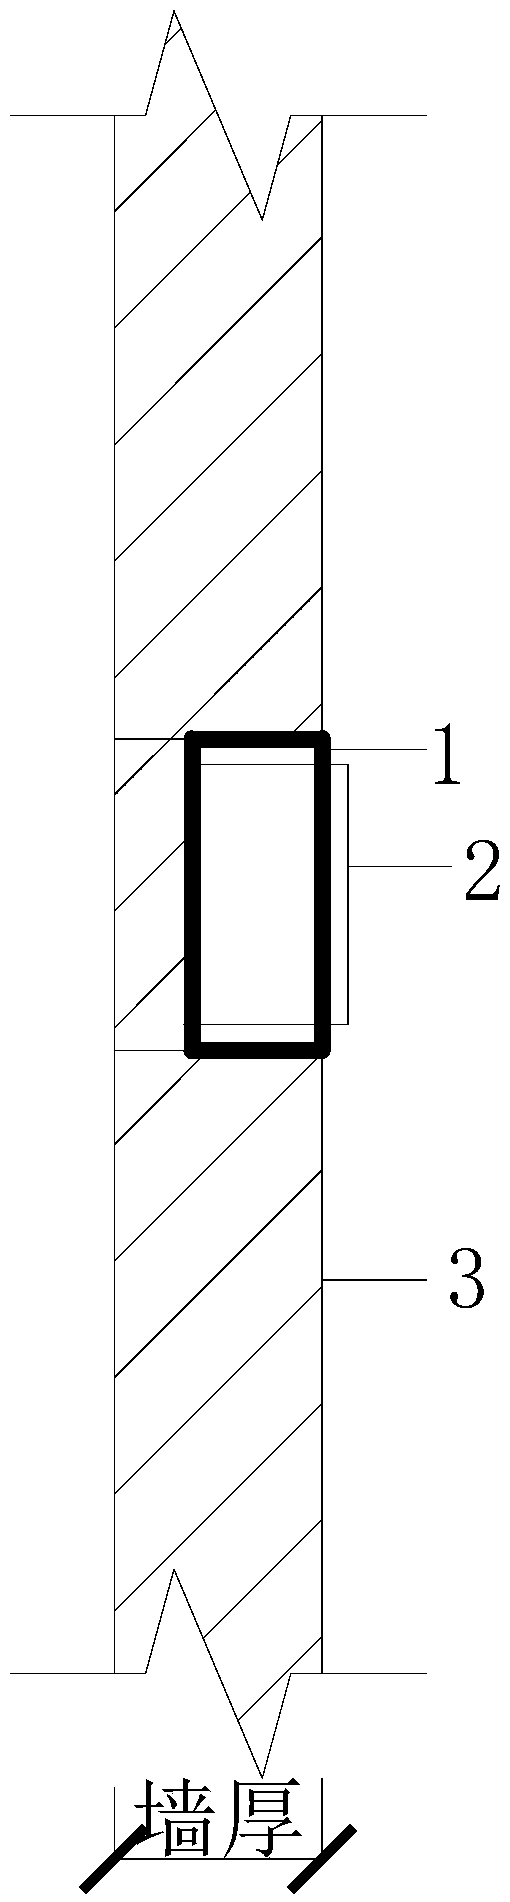 Construction method of concealed distribution box in pre-buried concrete prefabricated frame in brickwork structure